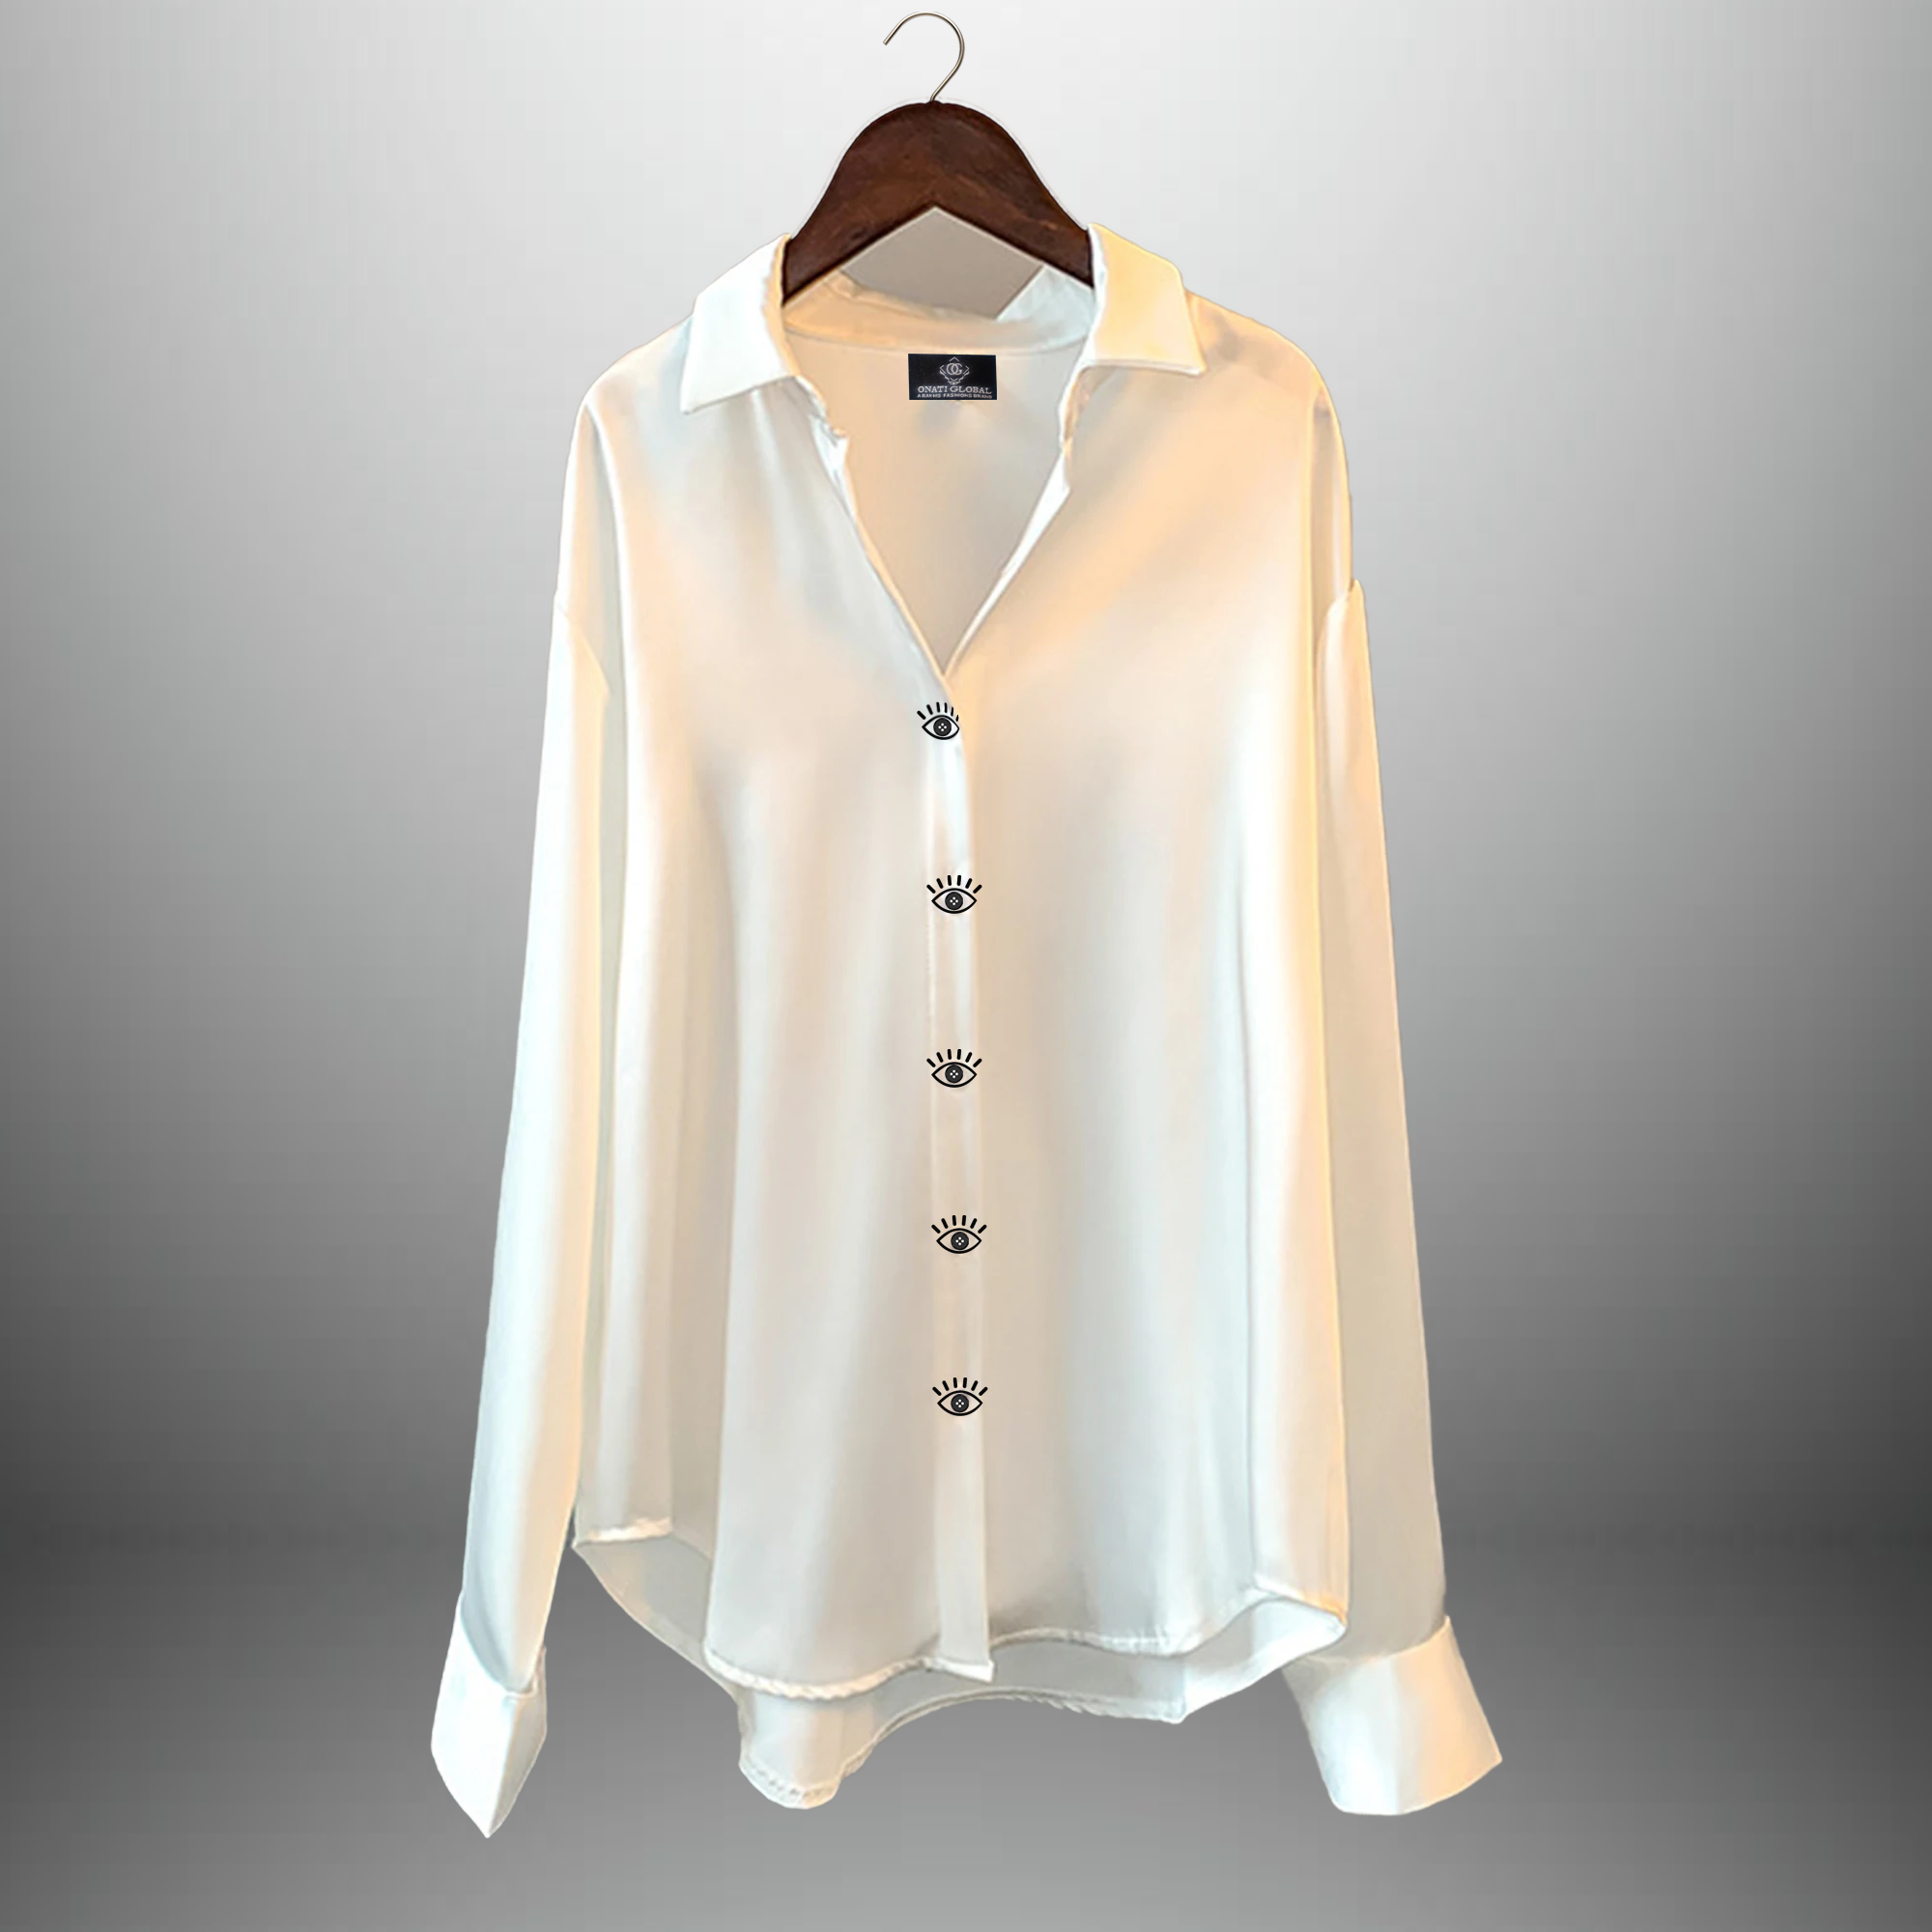 Cute Button-up White Shirt with Lashes-RET096